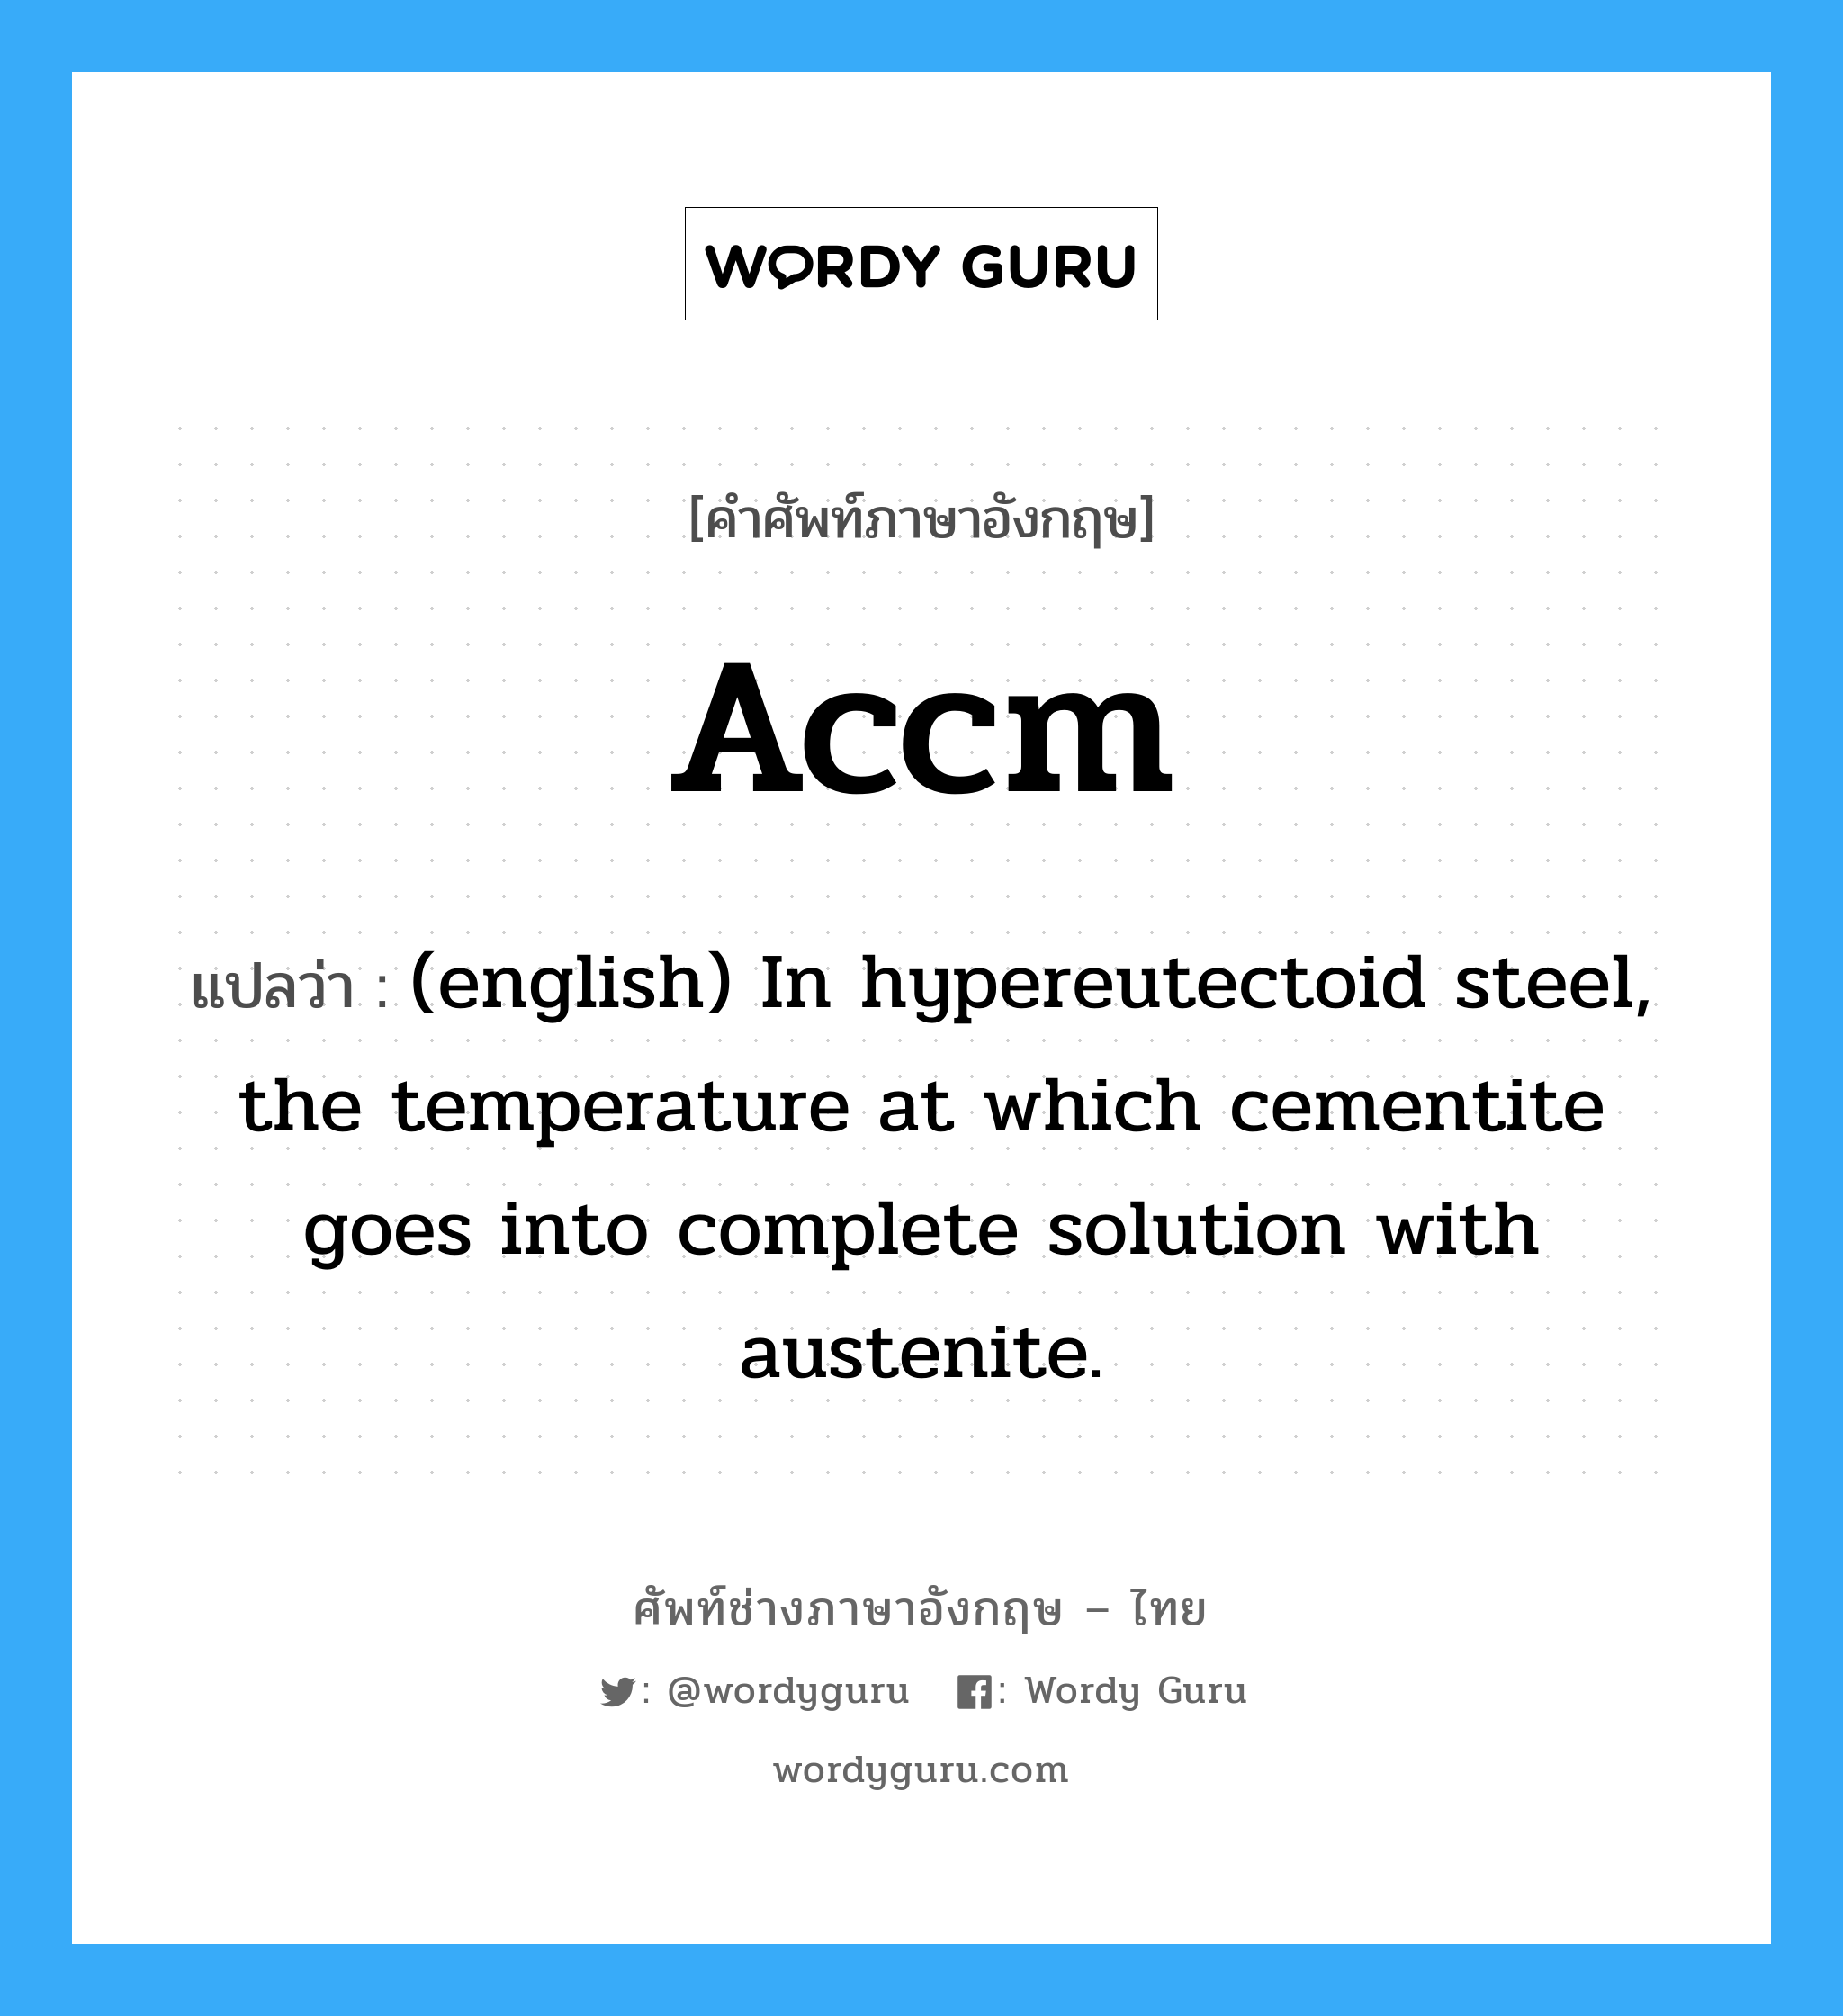 Accm แปลว่า?, คำศัพท์ช่างภาษาอังกฤษ - ไทย Accm คำศัพท์ภาษาอังกฤษ Accm แปลว่า (english) In hypereutectoid steel, the temperature at which cementite goes into complete solution with austenite.